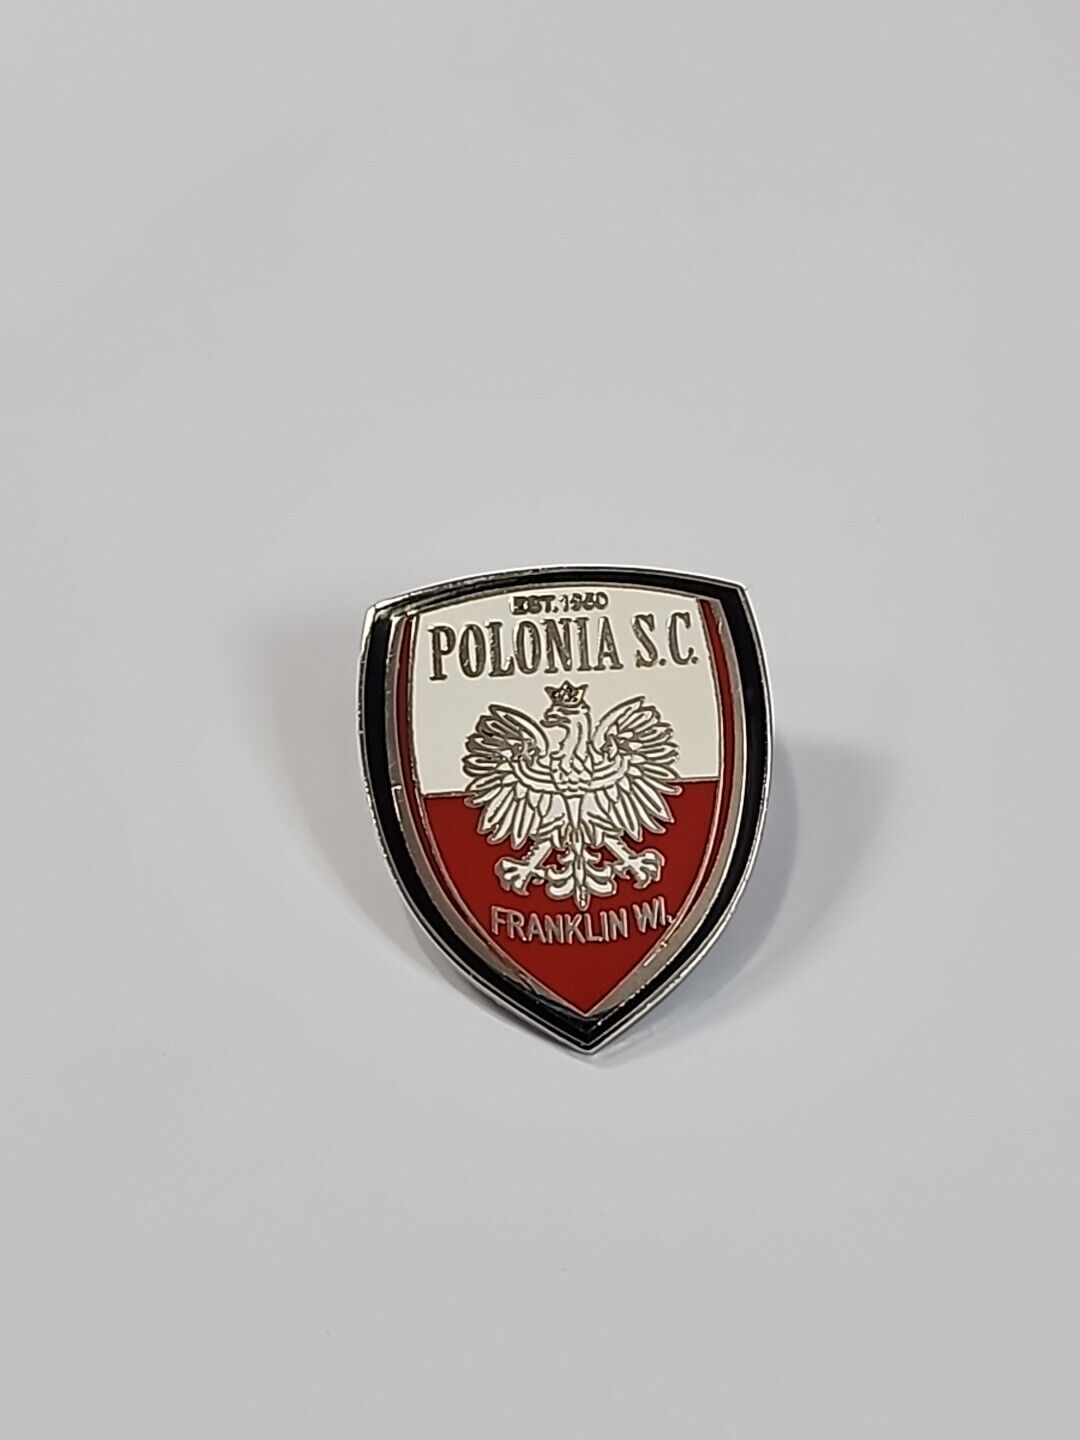 Polonia Soccer Club Lapel Pin Franklin Wisconsin Youth Sports